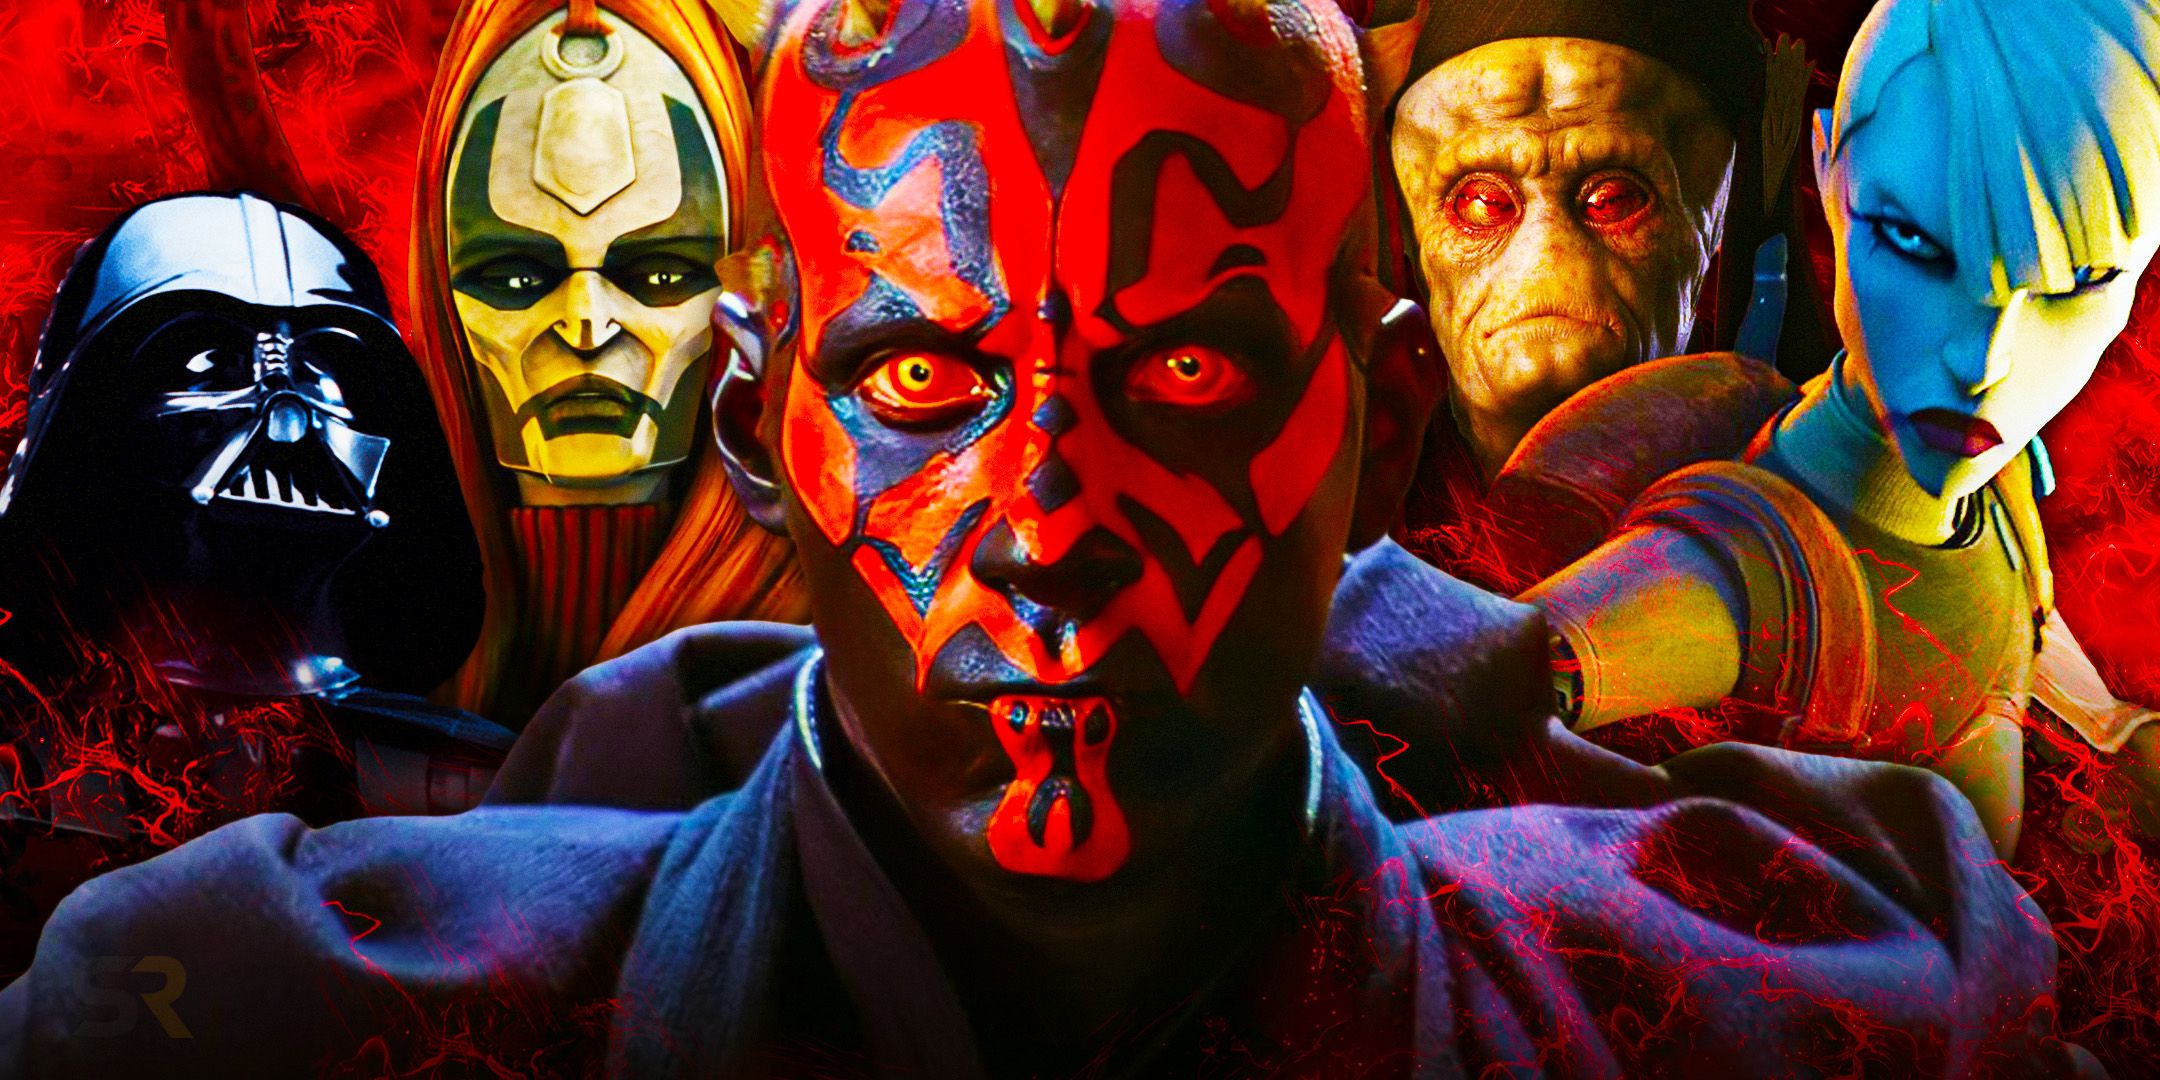 Darth Vader, Mother Talzin, Darth Maul, Nute Gunray, and Asajj Ventress in a combined image all facing forward in front of a red background 